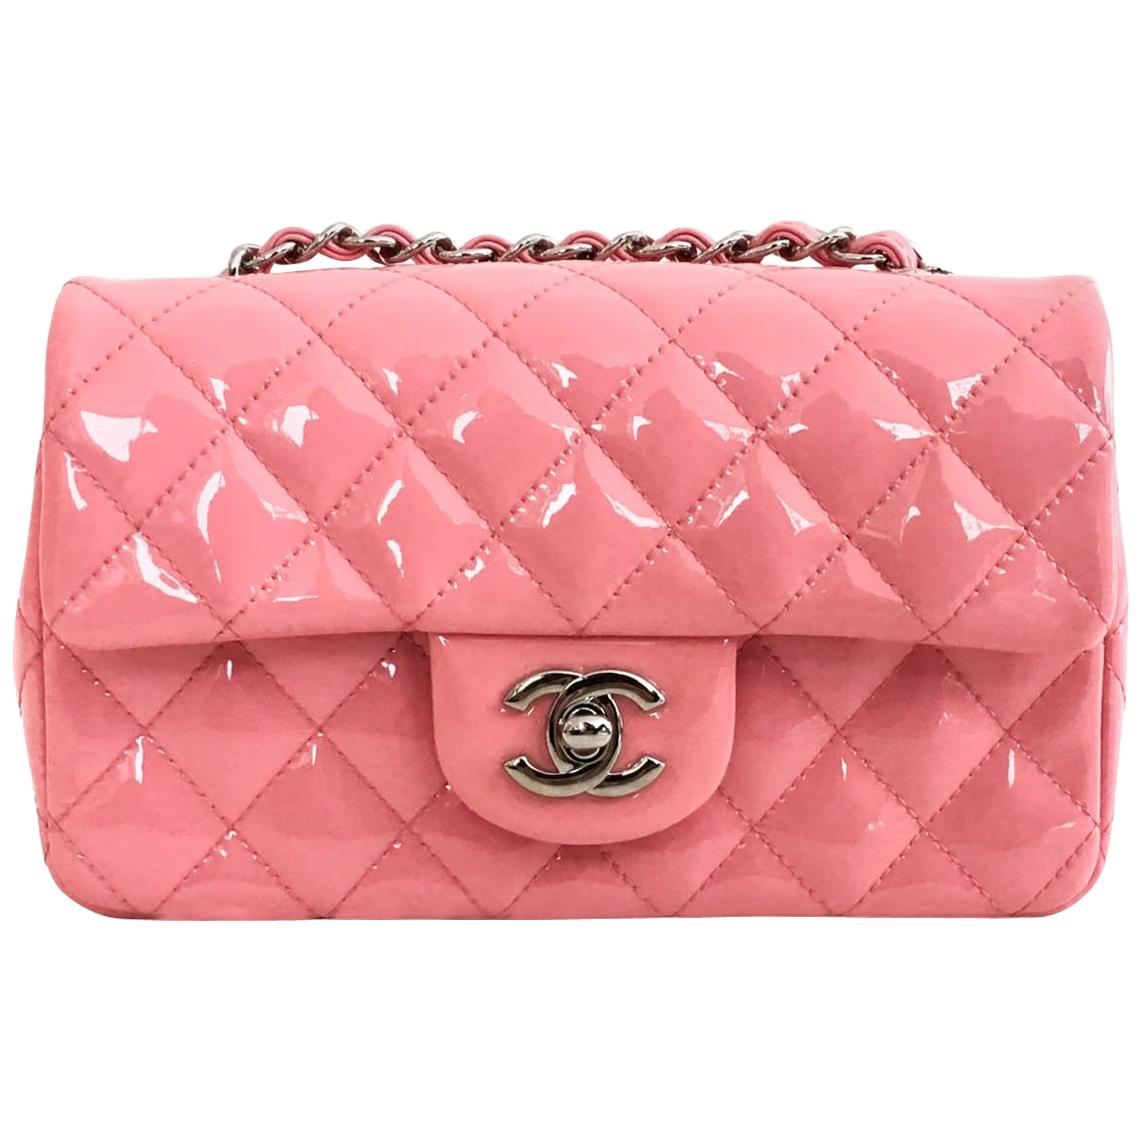 Chanel Mini rectangle crossbody Flap Bag in pink quilted patent leather For Sale